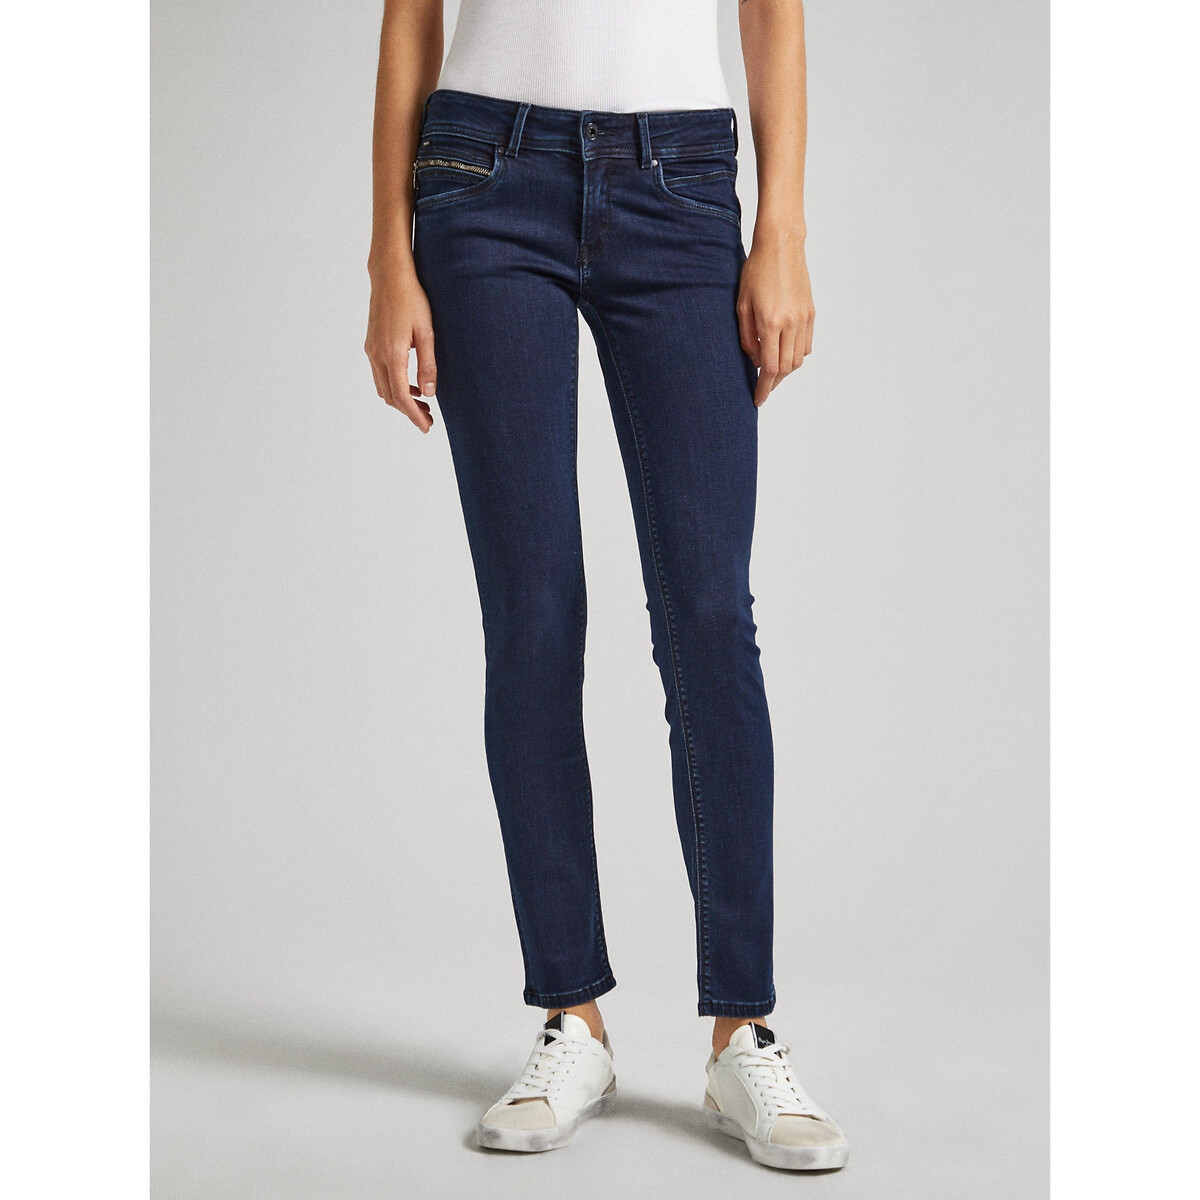 Slim jeans, lage taille-Pepe Jeans 1